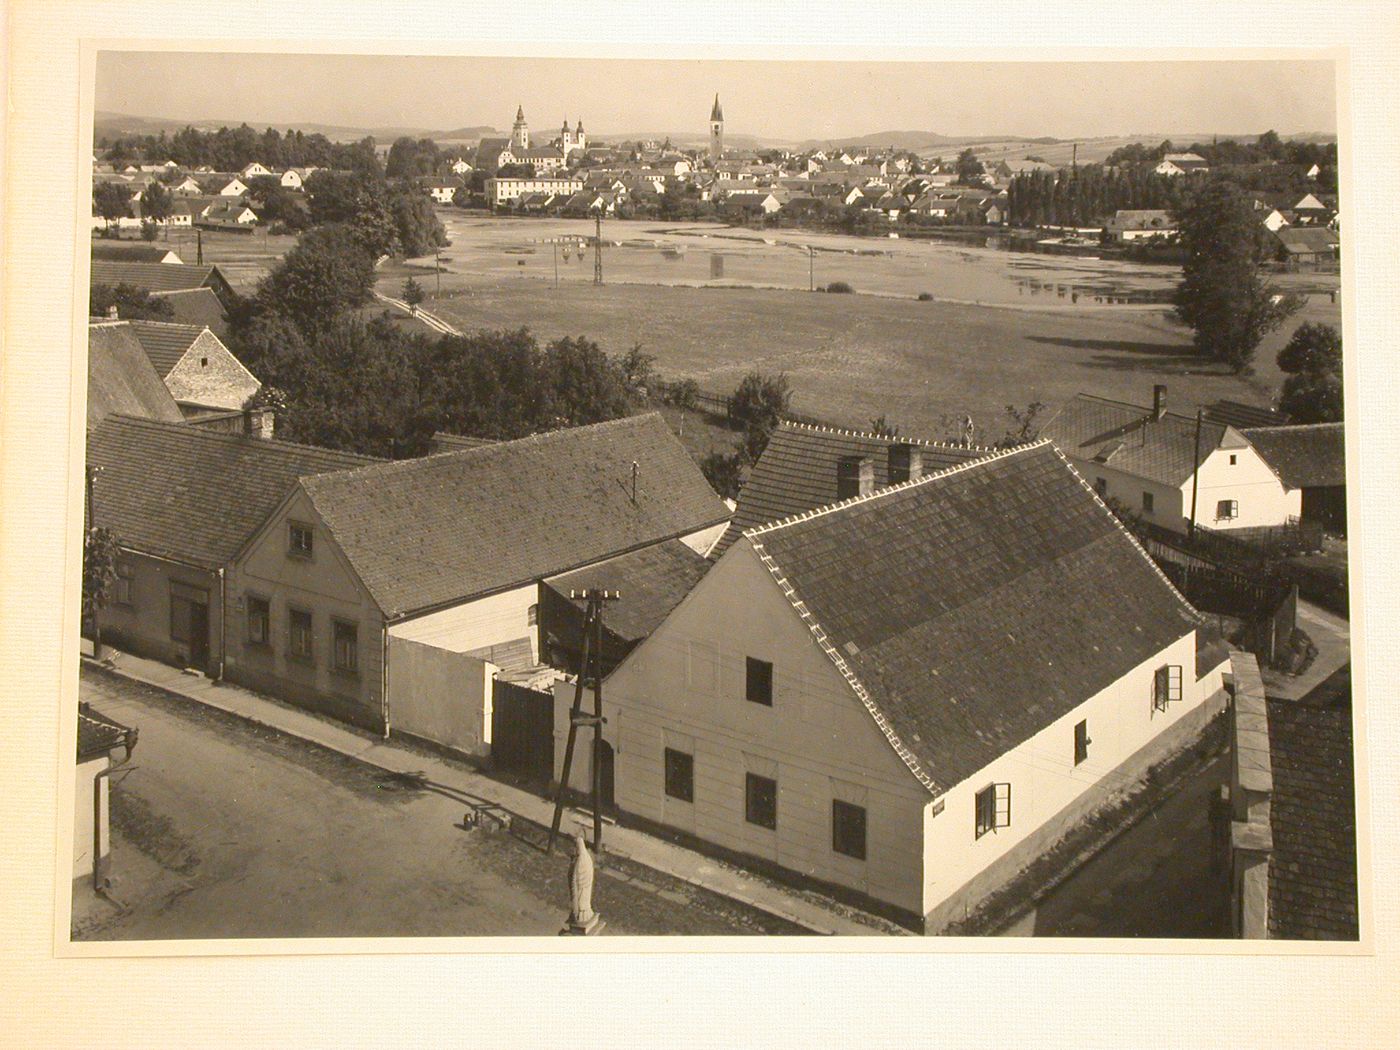 View from across Staromestský Pond and showing the towers of St. James Church, the Church of Jesus' Name and the Church of the Holy Spirit, Telc, Czechoslovakia (now Czech Republic)